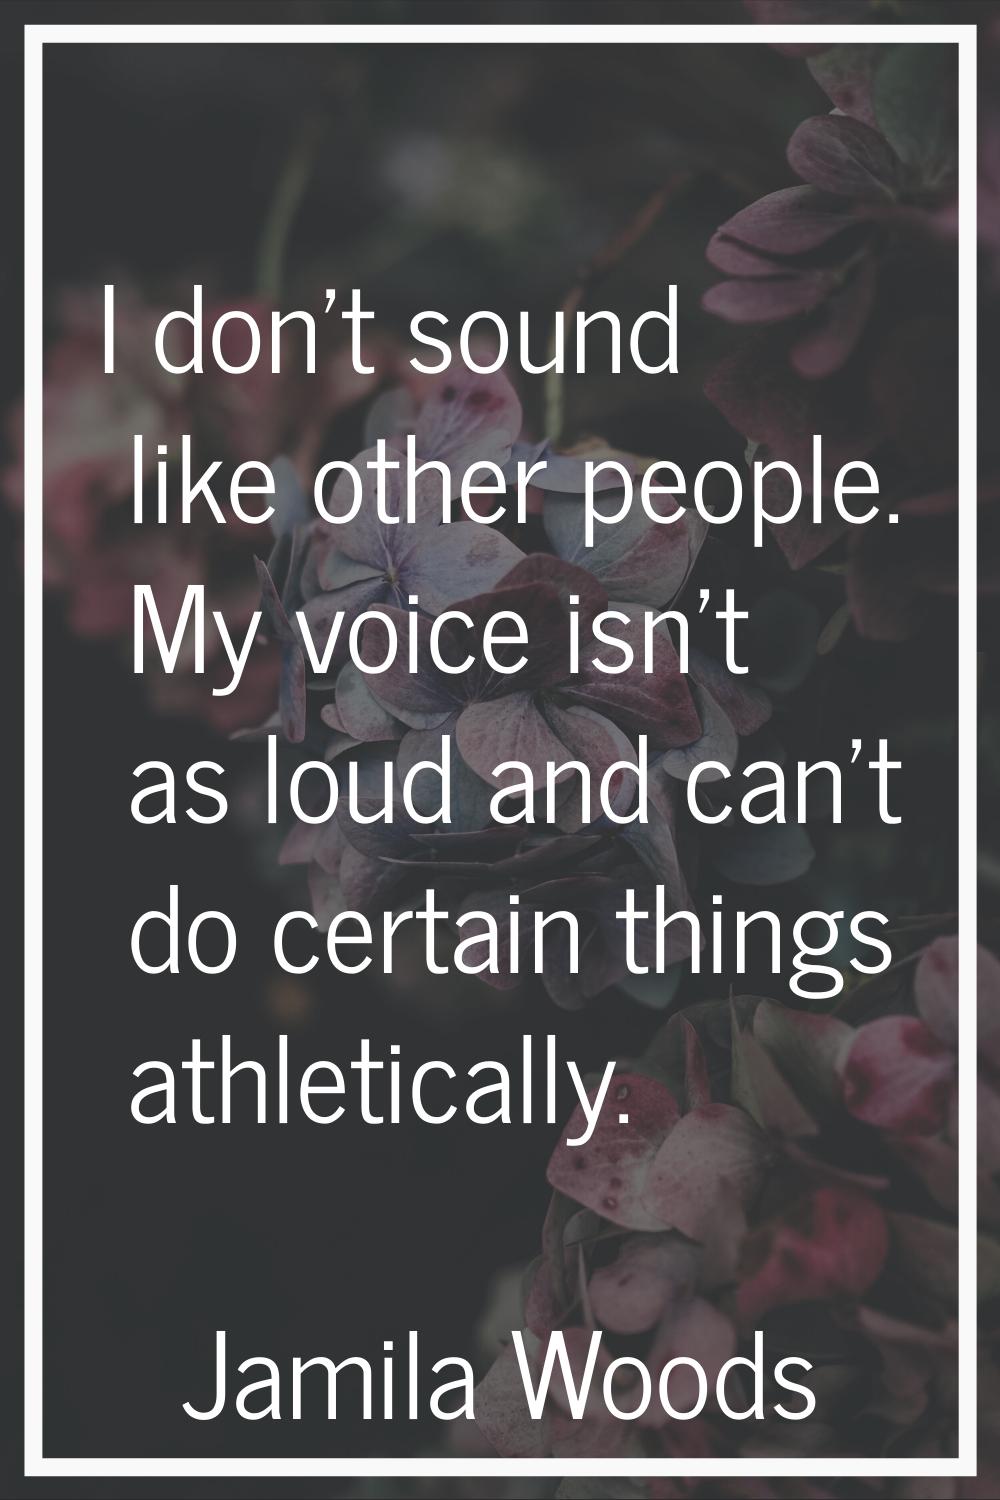 I don't sound like other people. My voice isn't as loud and can't do certain things athletically.